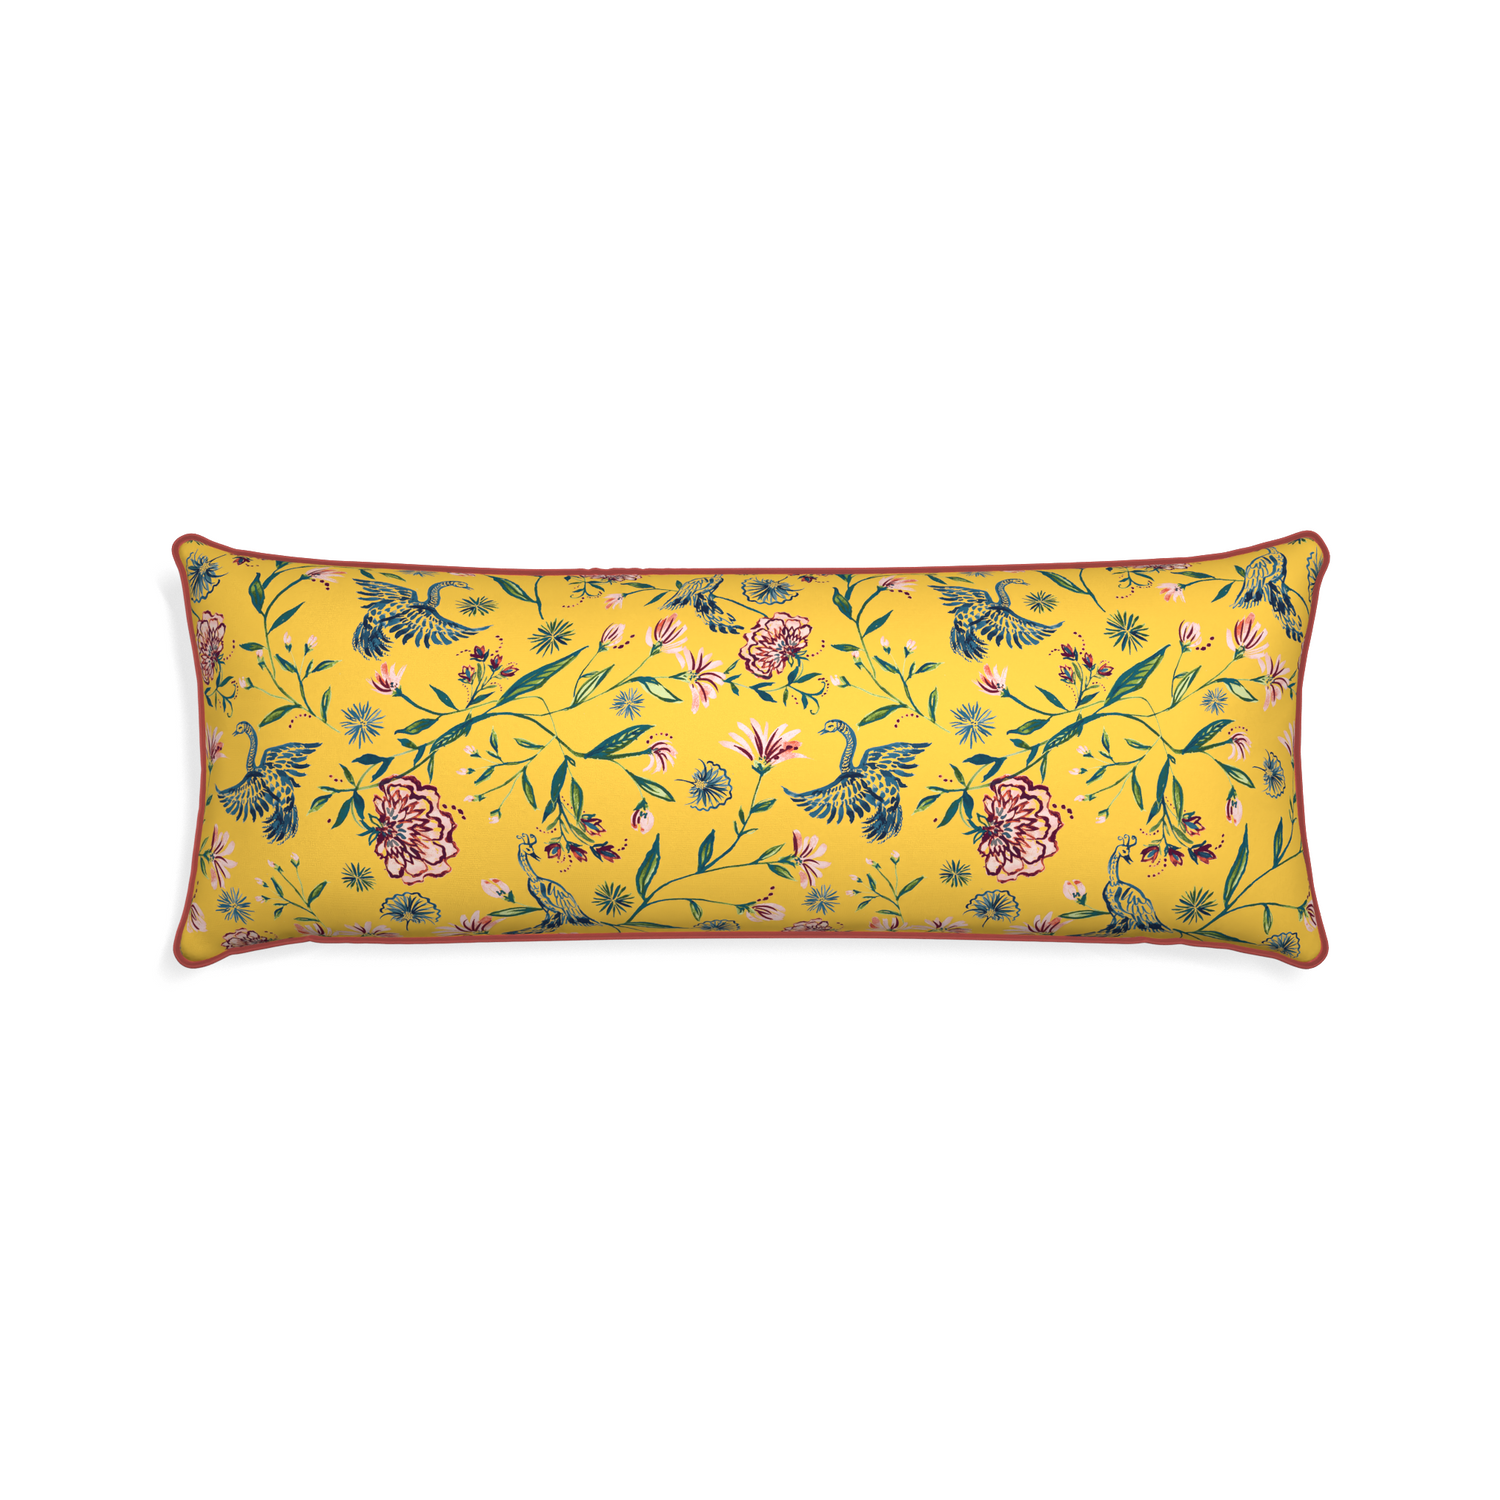 Xl-lumbar daphne canary custom pillow with c piping on white background